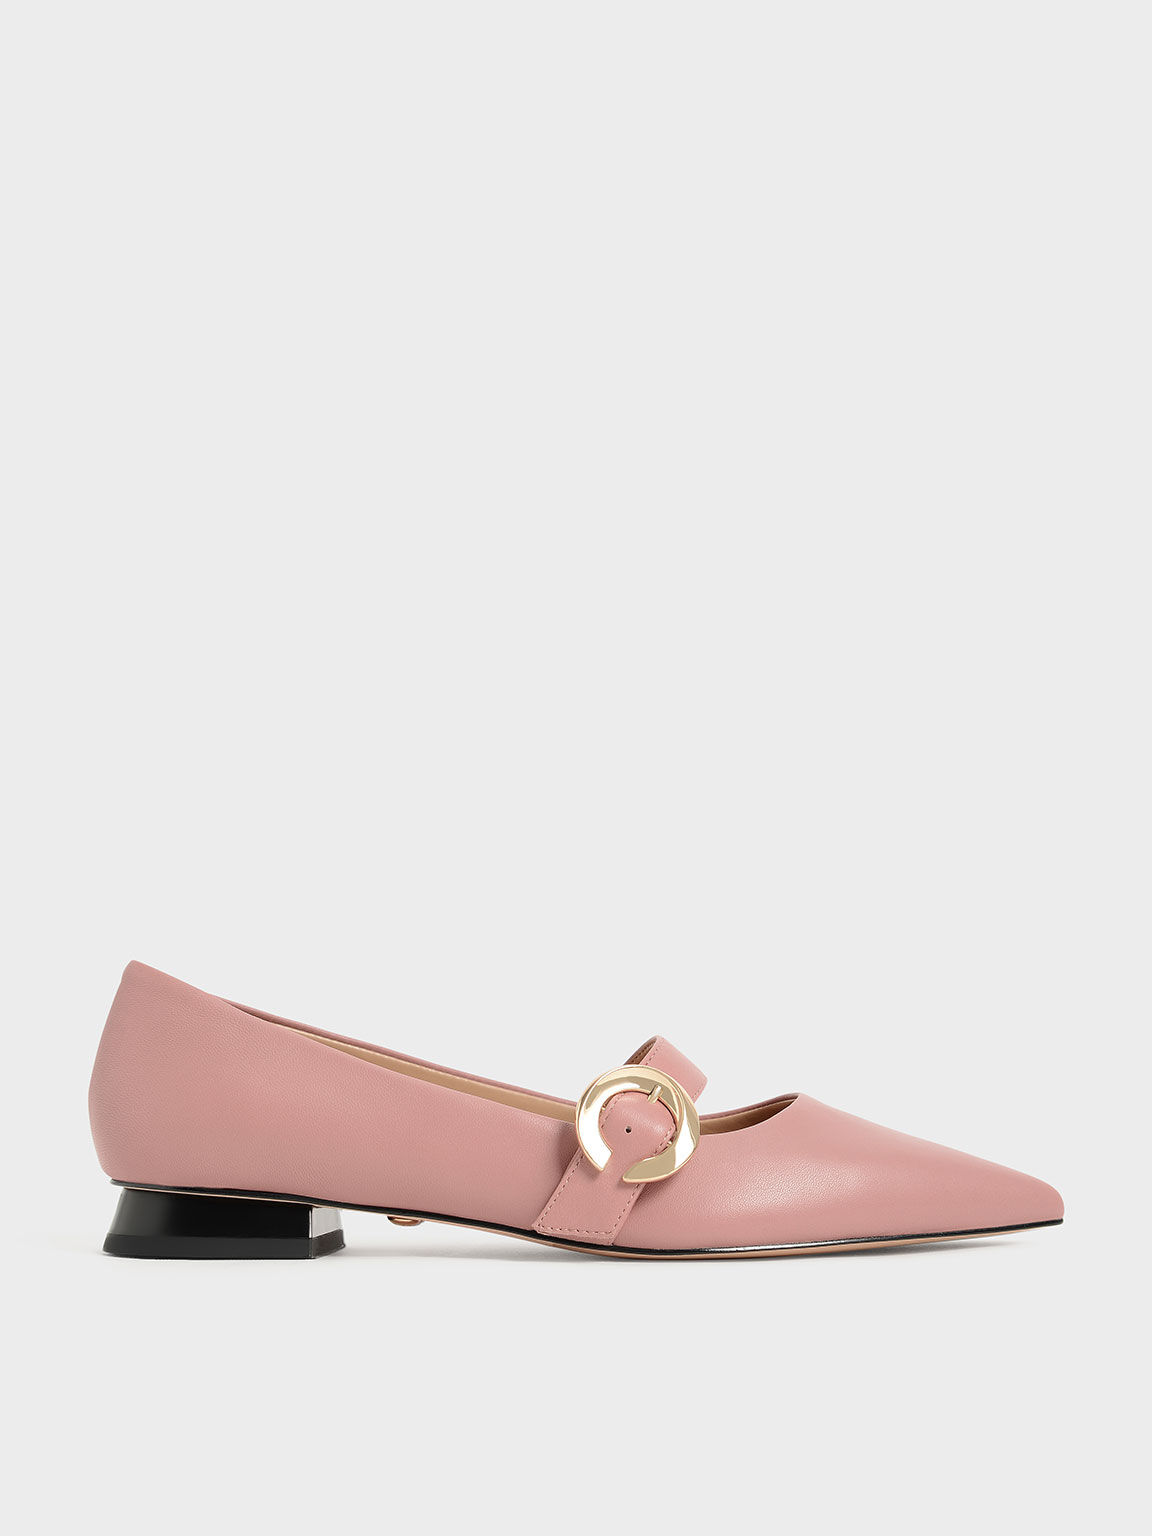 Metallic Buckle Leather Mary Janes, Pink, hi-res